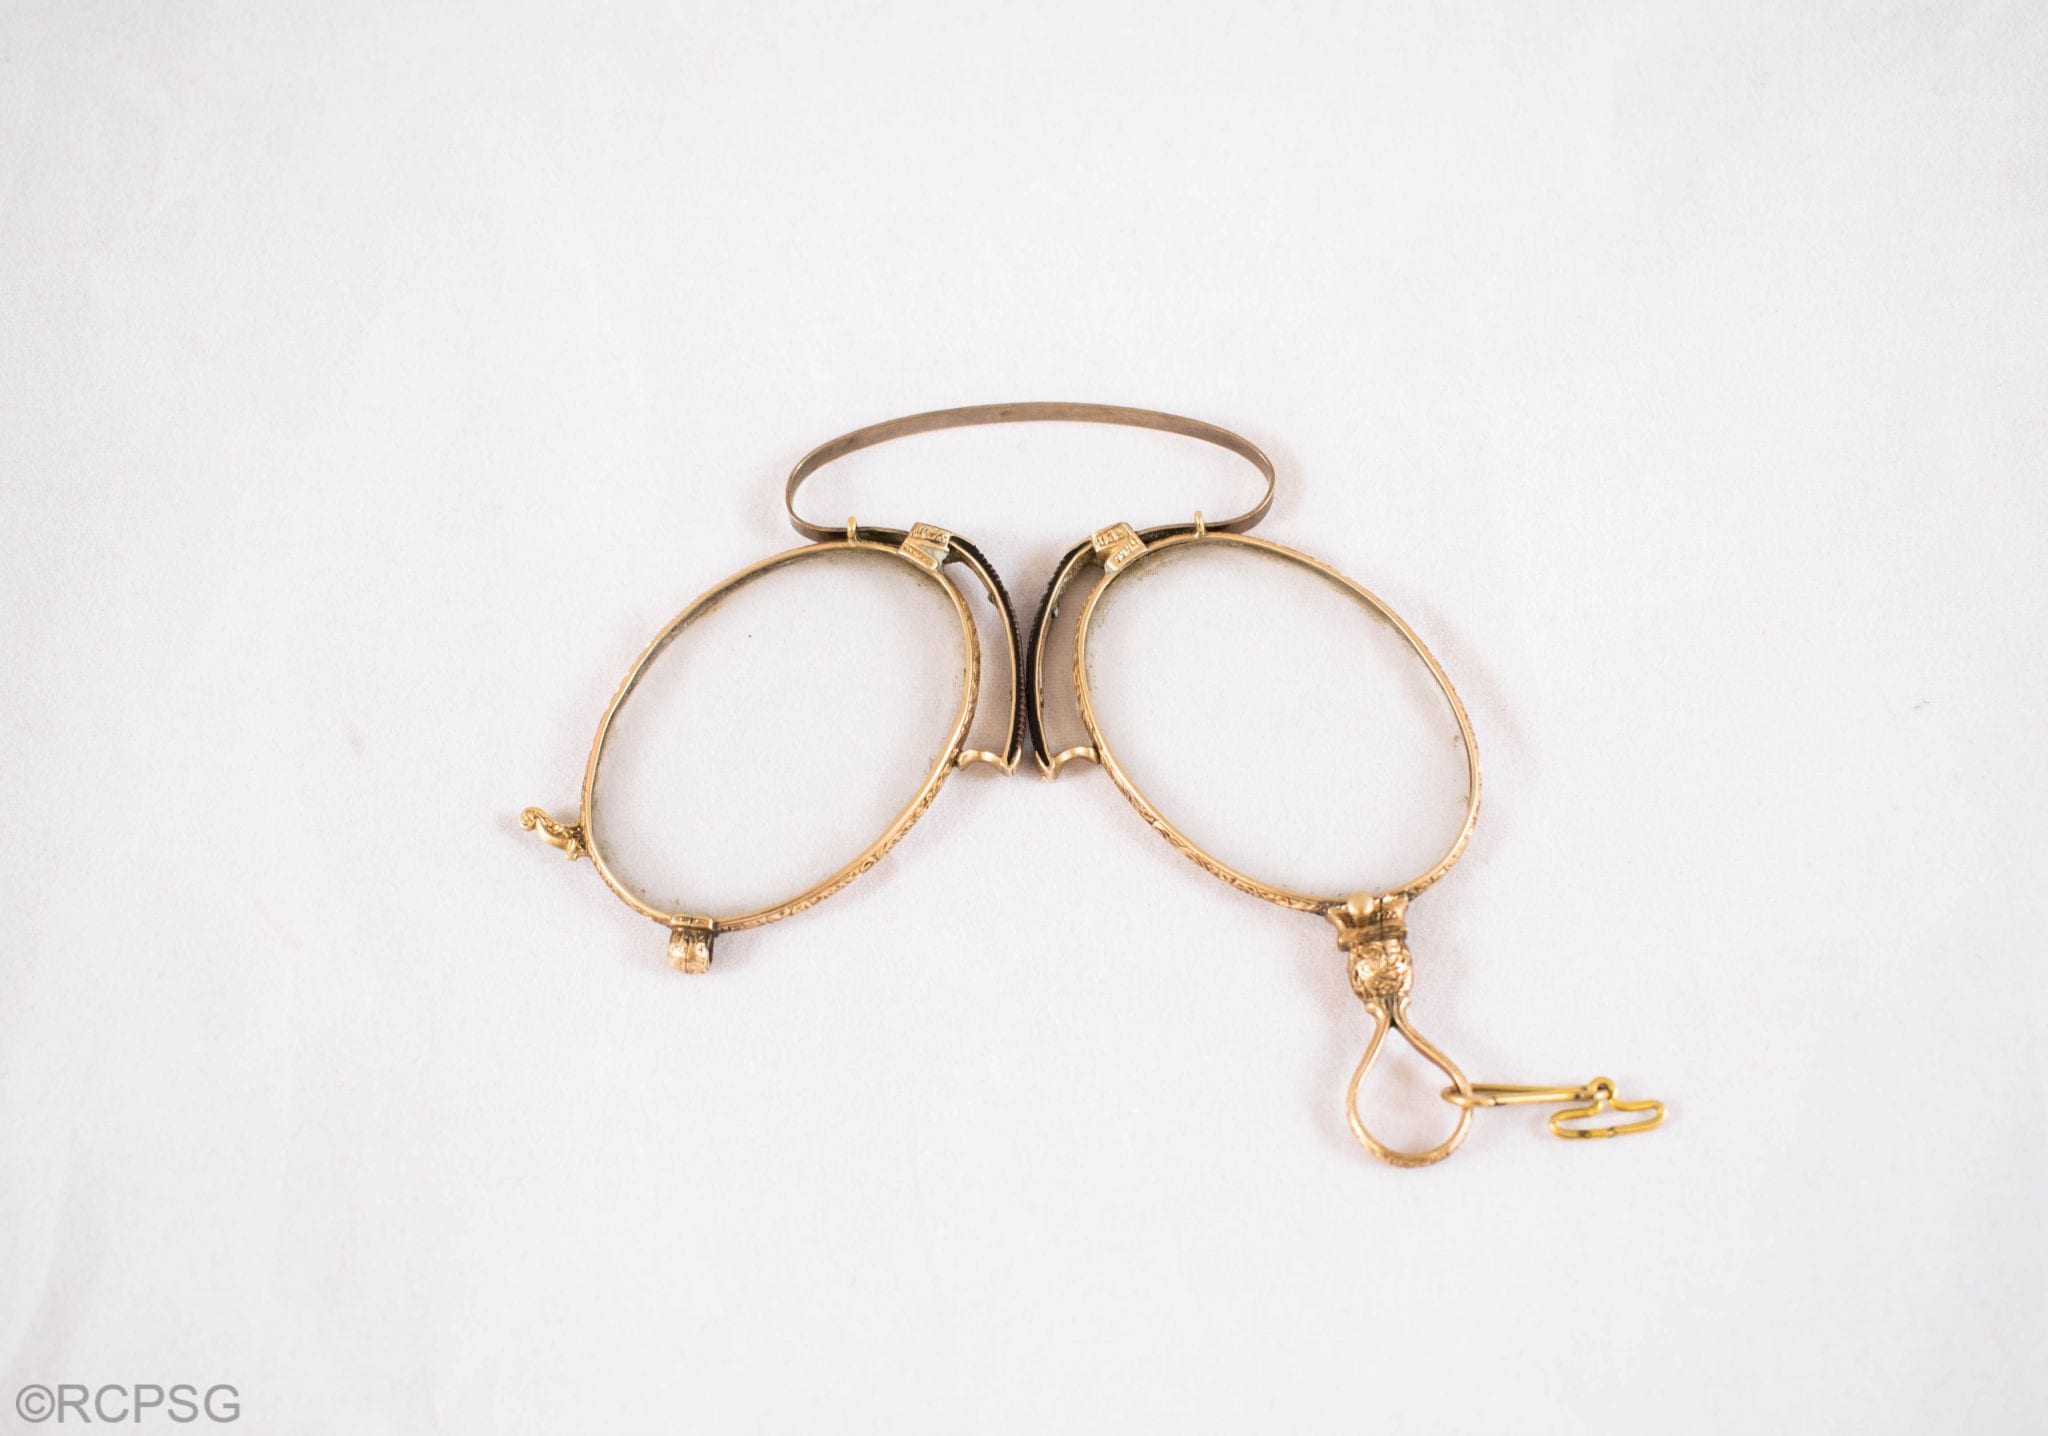 Folding pince-nez style spectacles